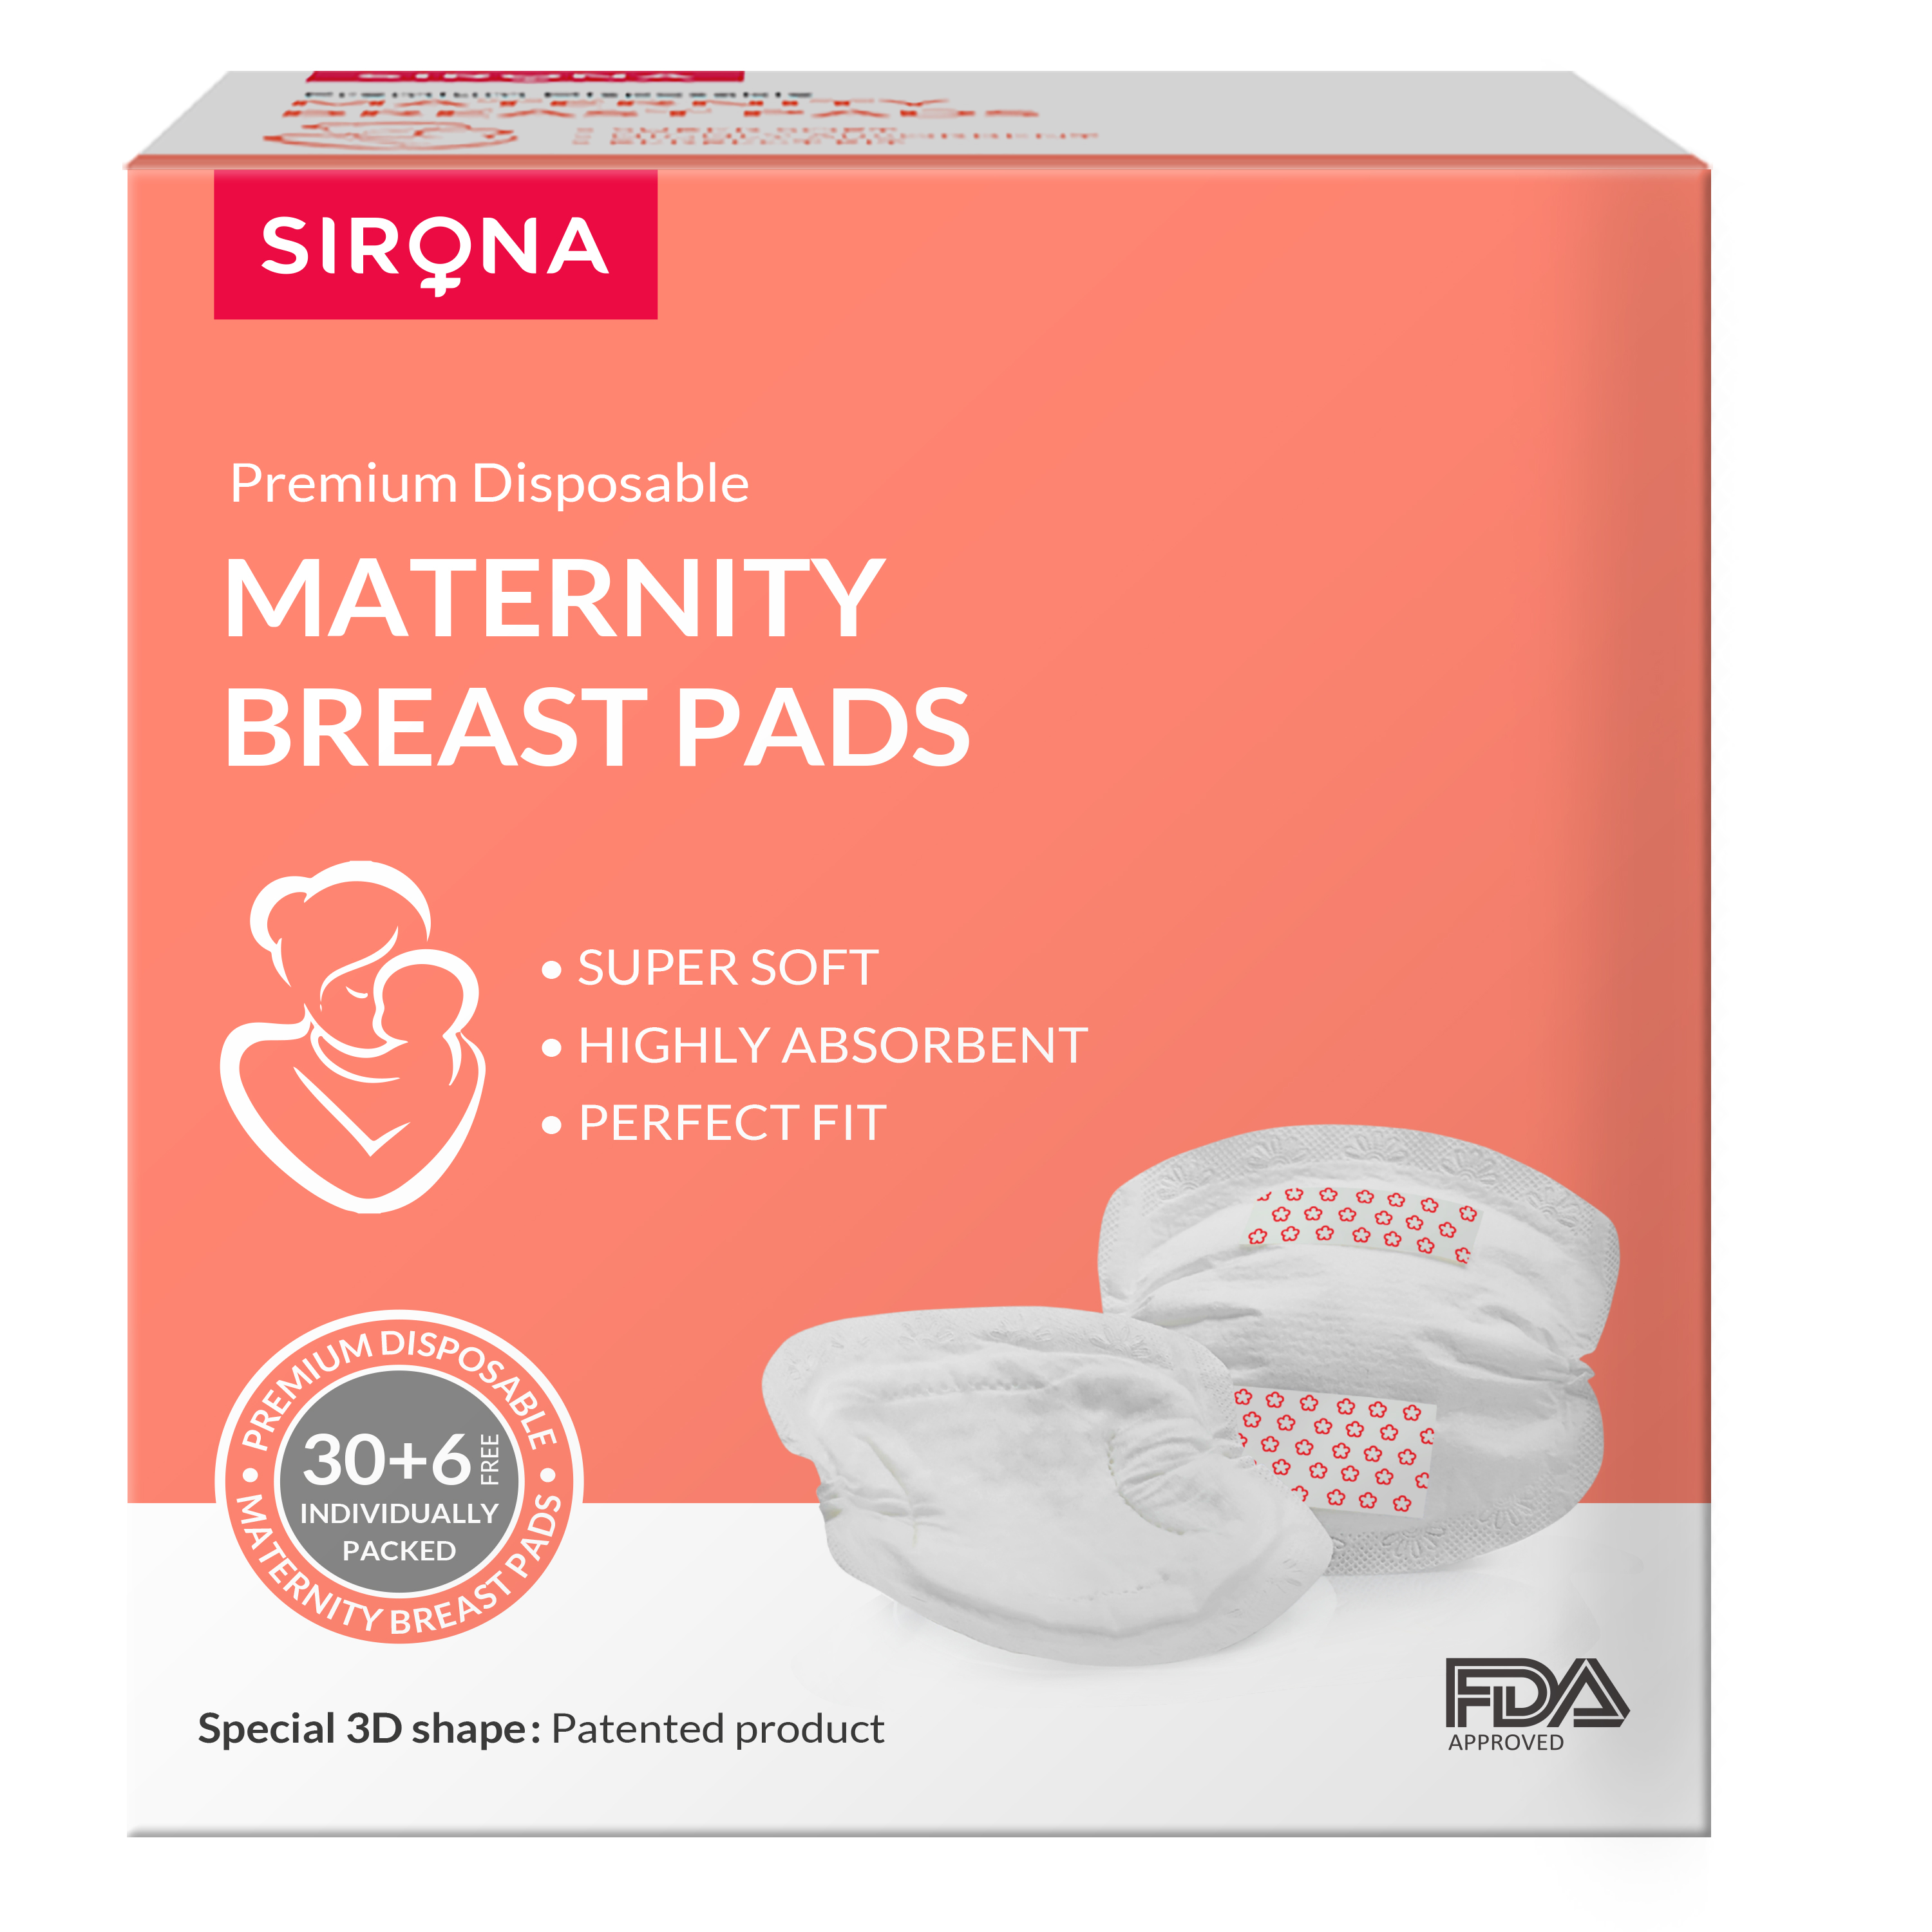 Sirona Disposable Maternity Breast Pads for Women - 36 Pads